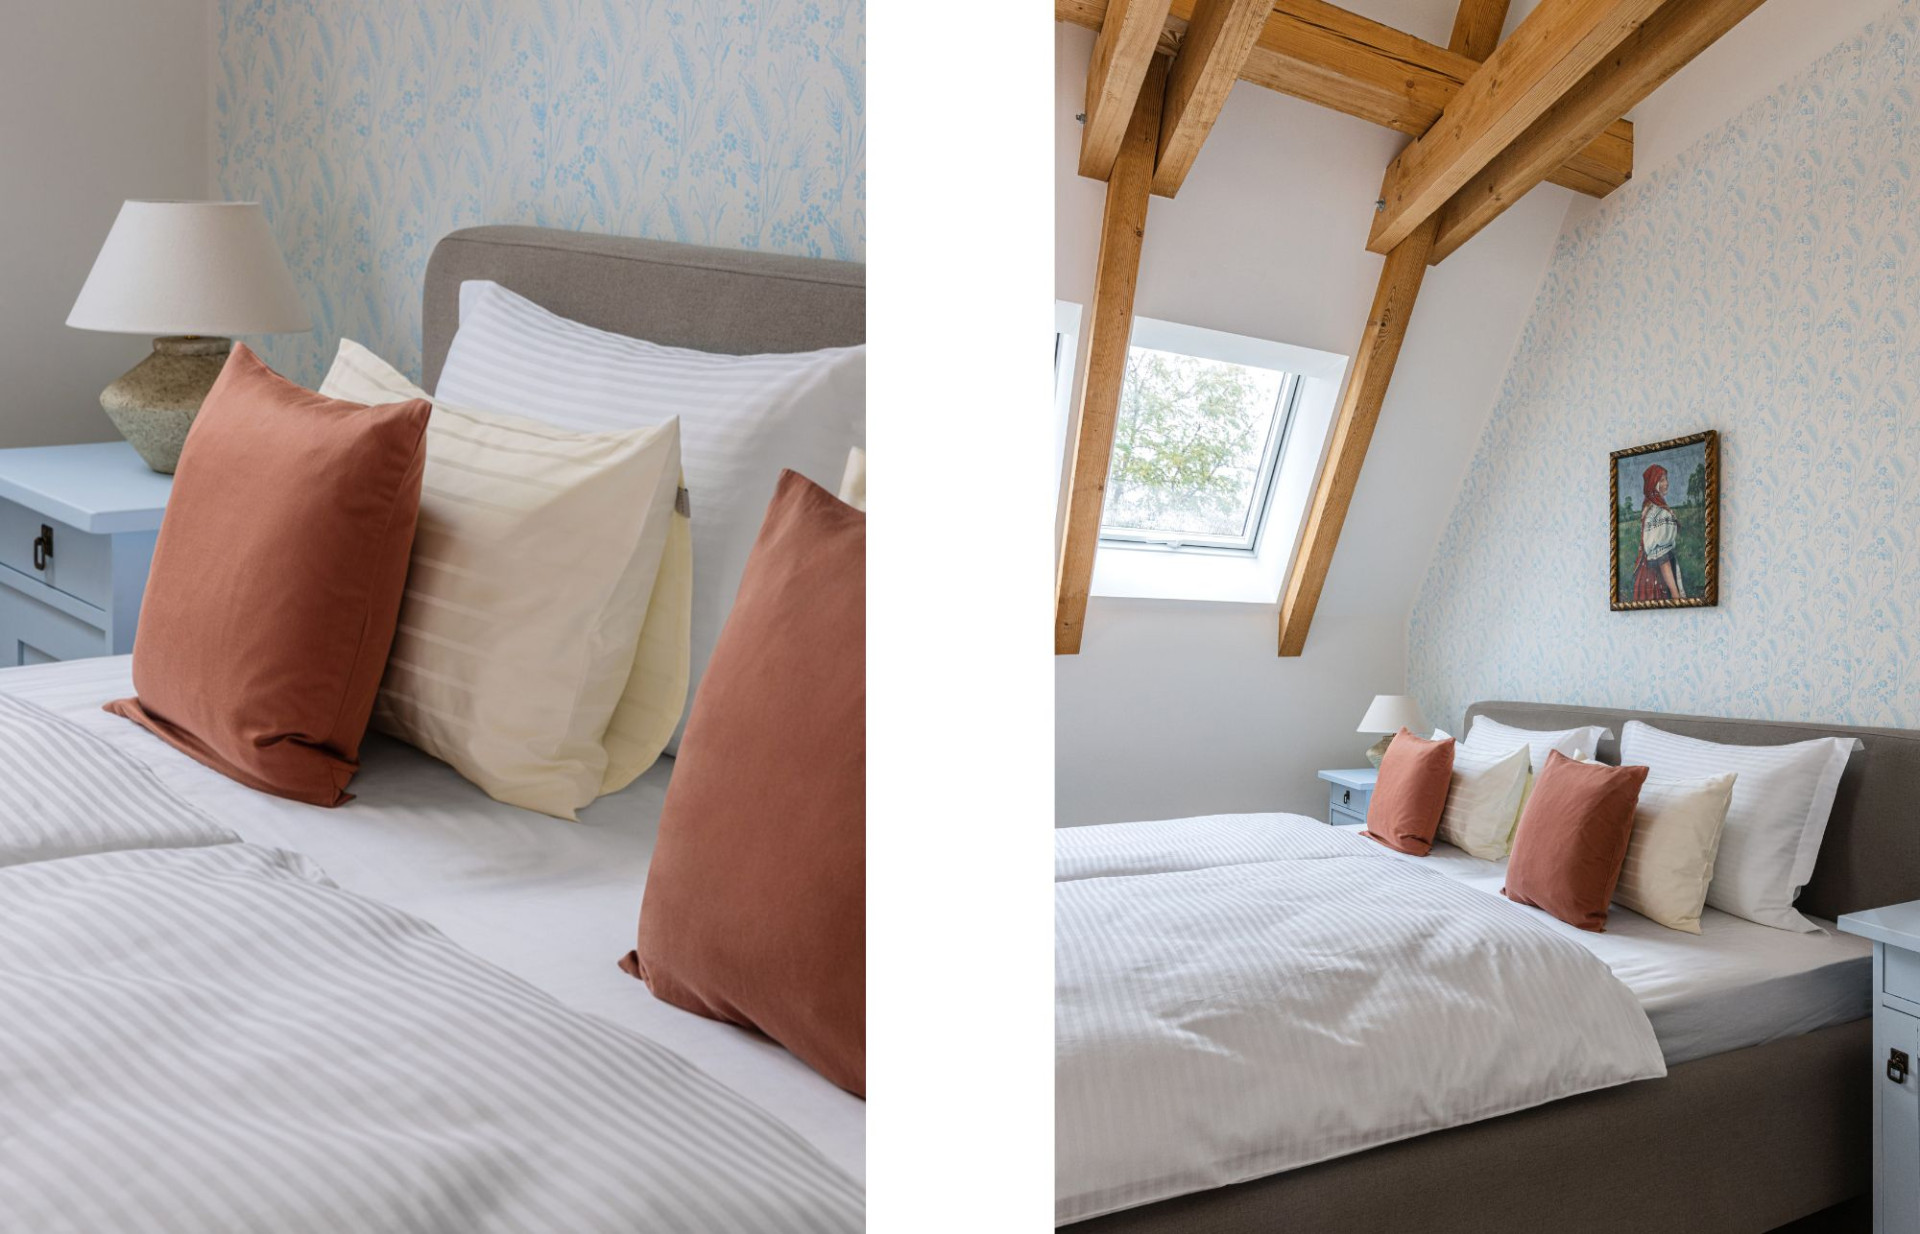 The second bedroom upstairs features our white Daily Notes and cream Flat White bed linen, together with Grandma's House pillowcases.